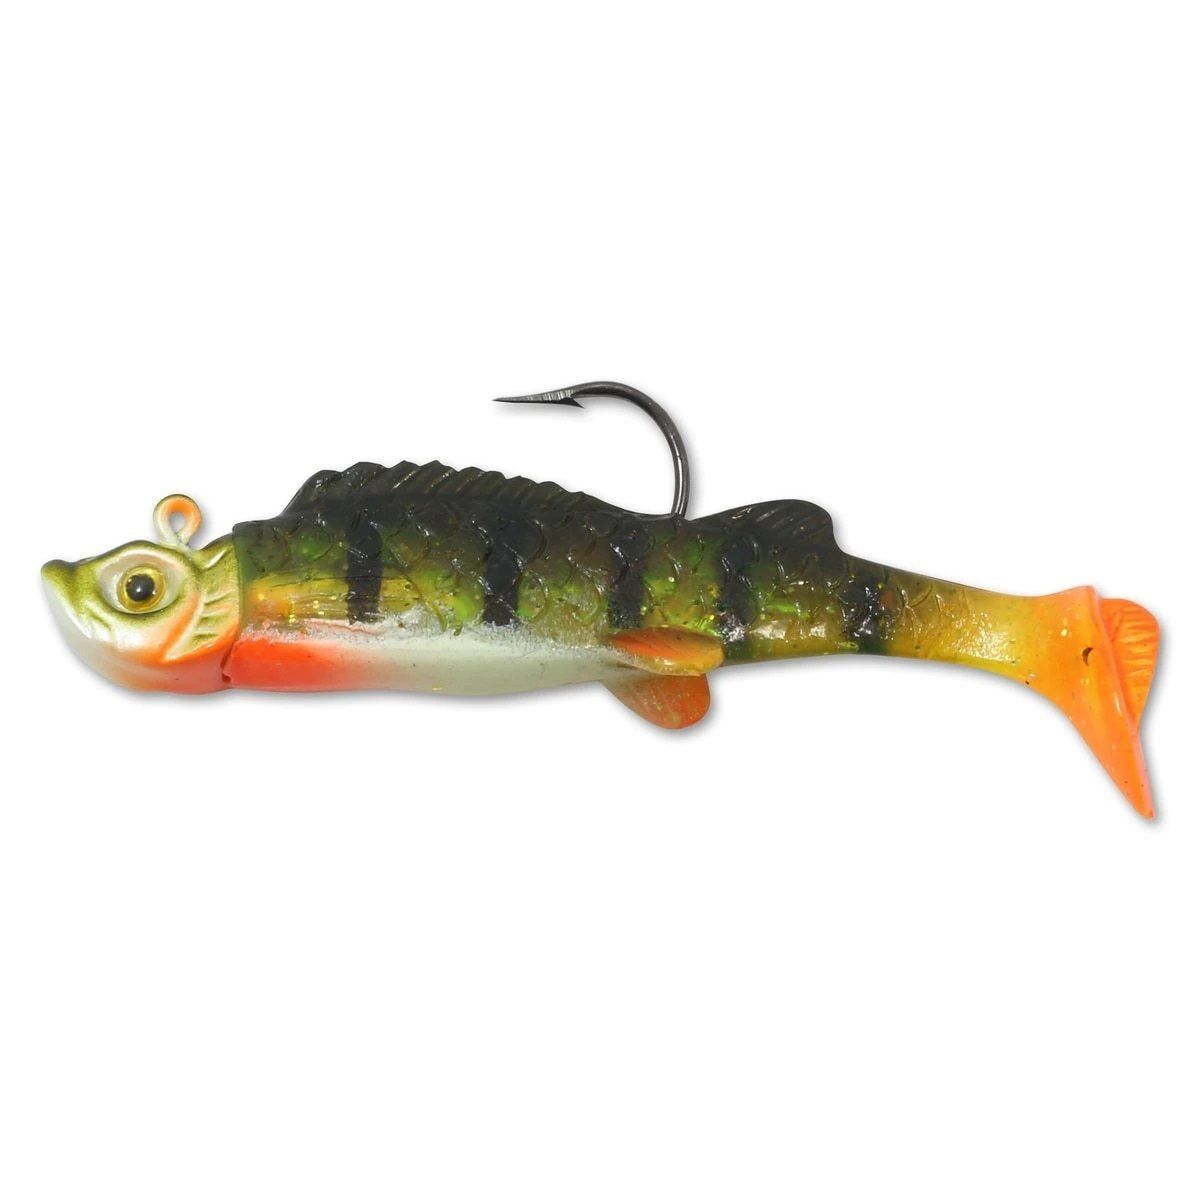 Northland Tackle Mimic Minnow Shad 2-Pack 1/8 oz - Perch